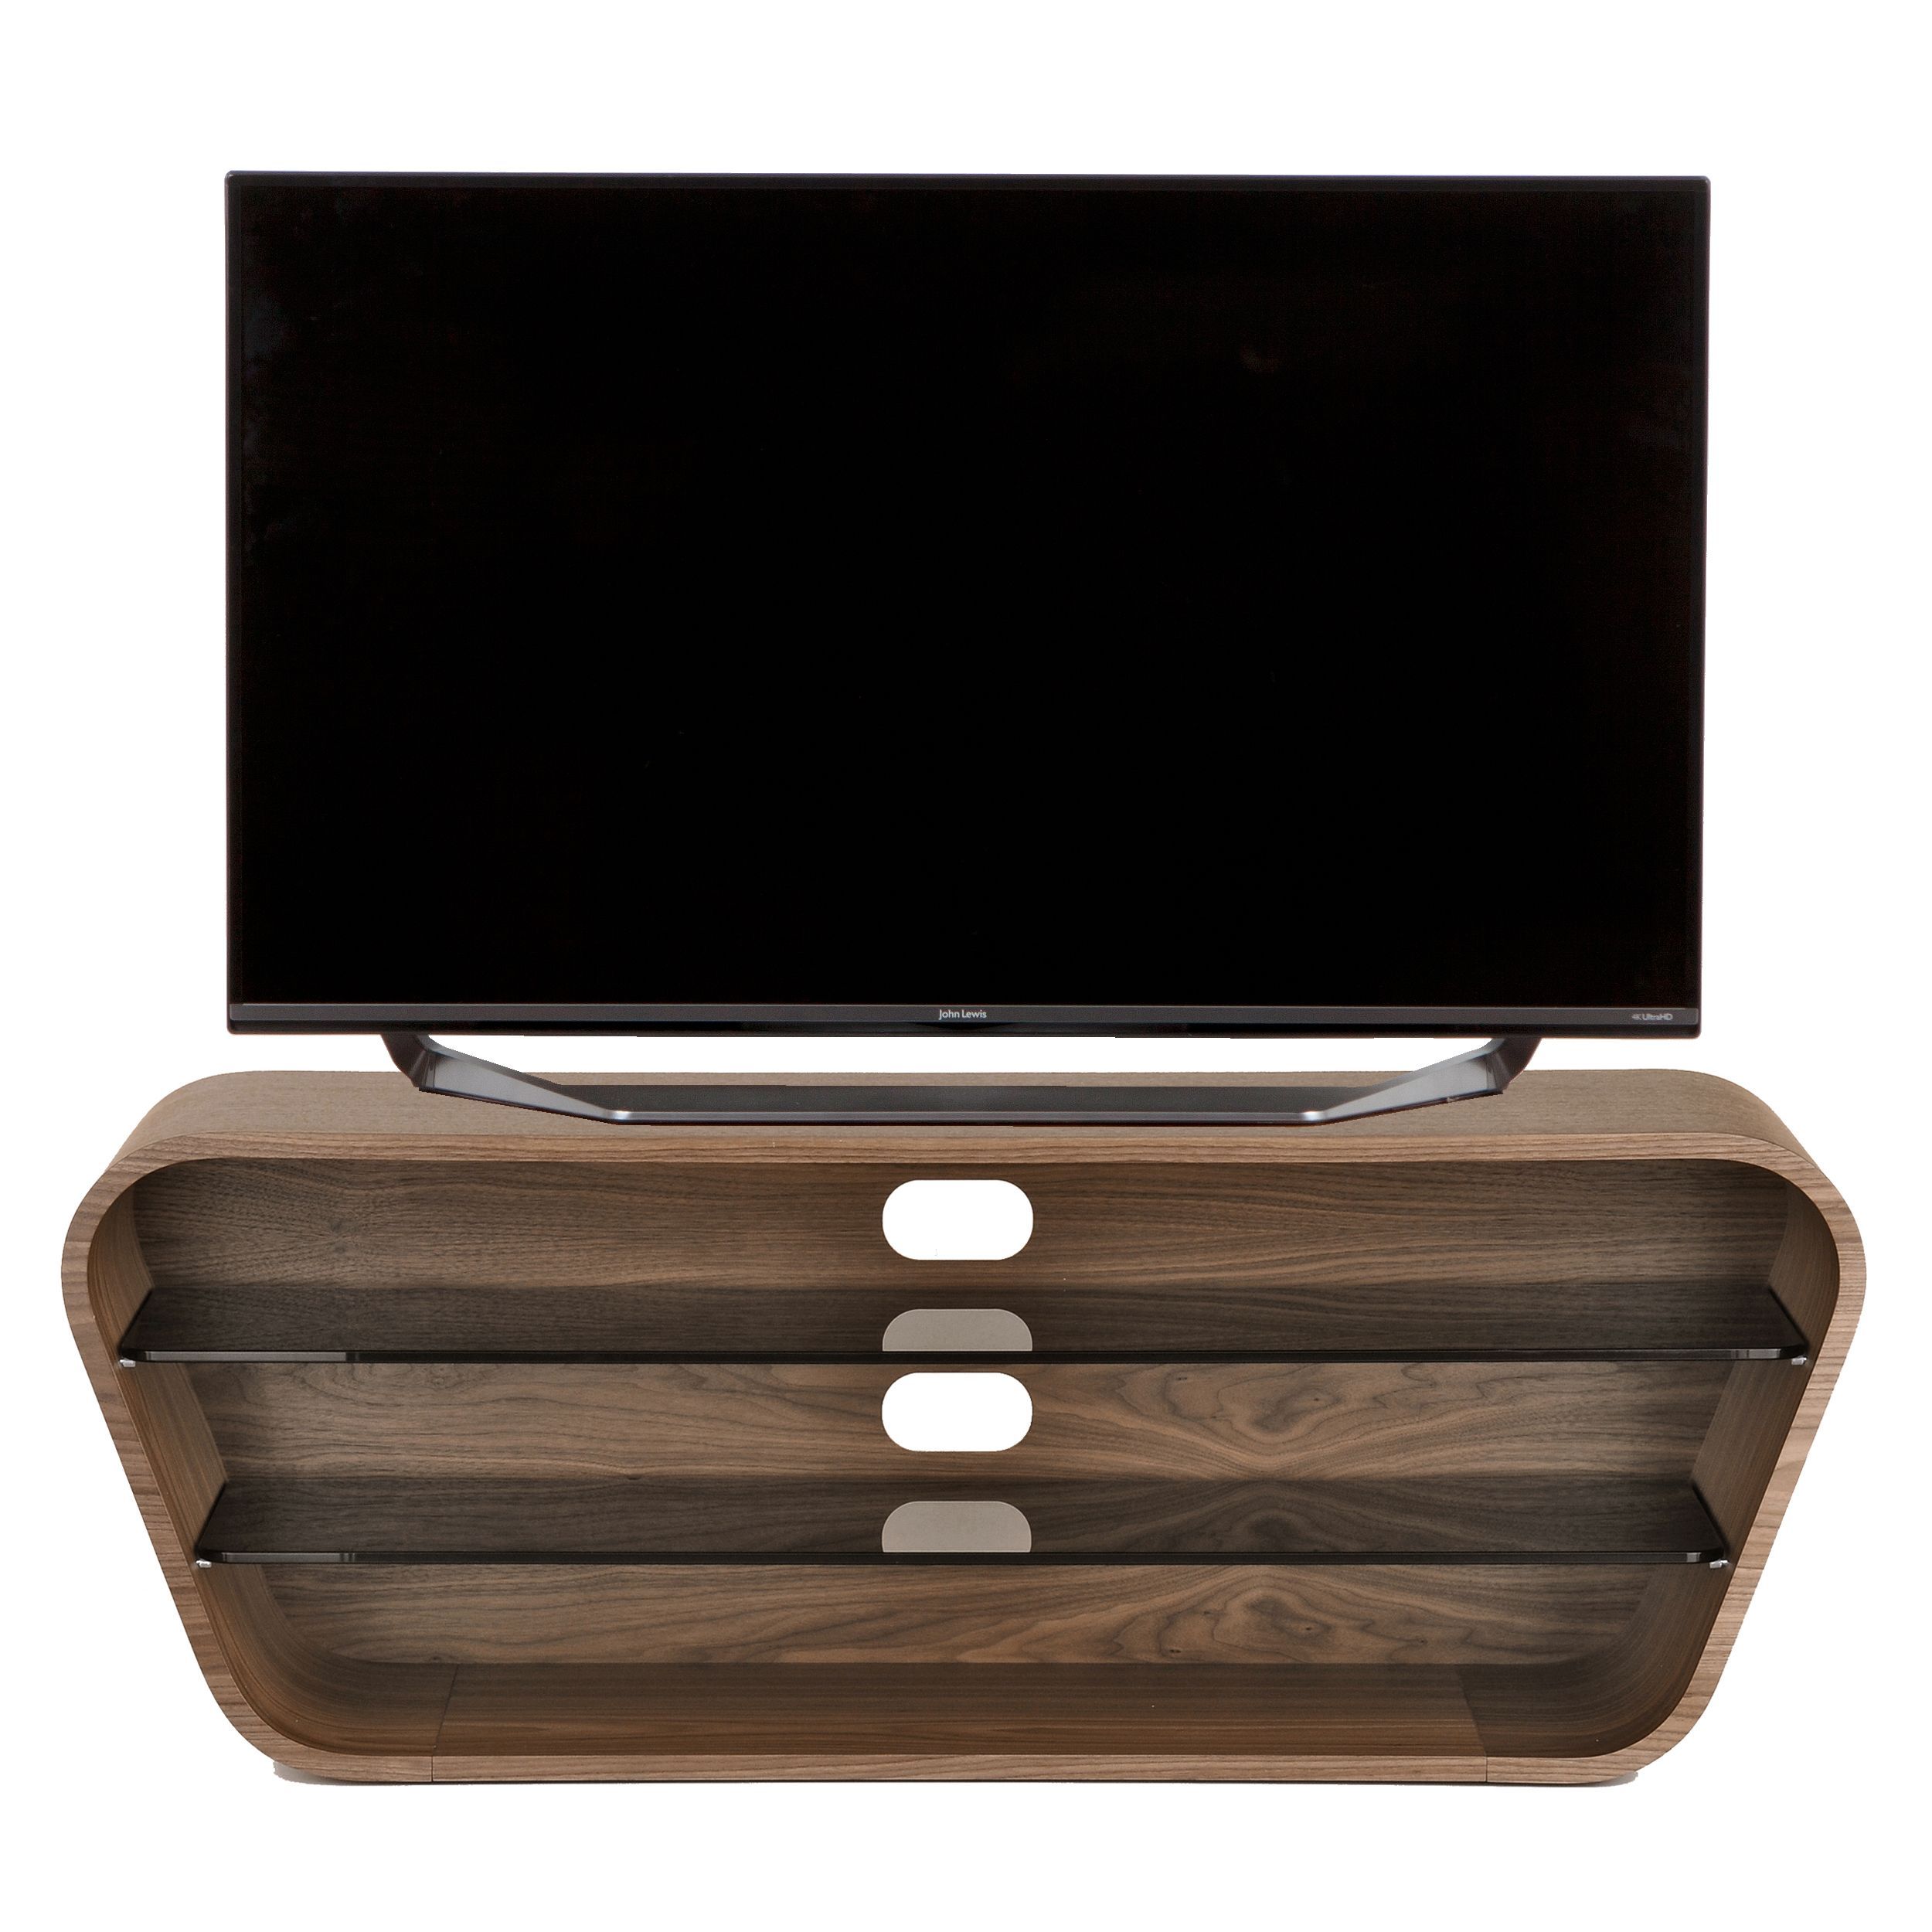 The Swish Tv Unit Is A Modern, Slimline Design With A Pertaining To Slimline Tv Units (View 6 of 15)